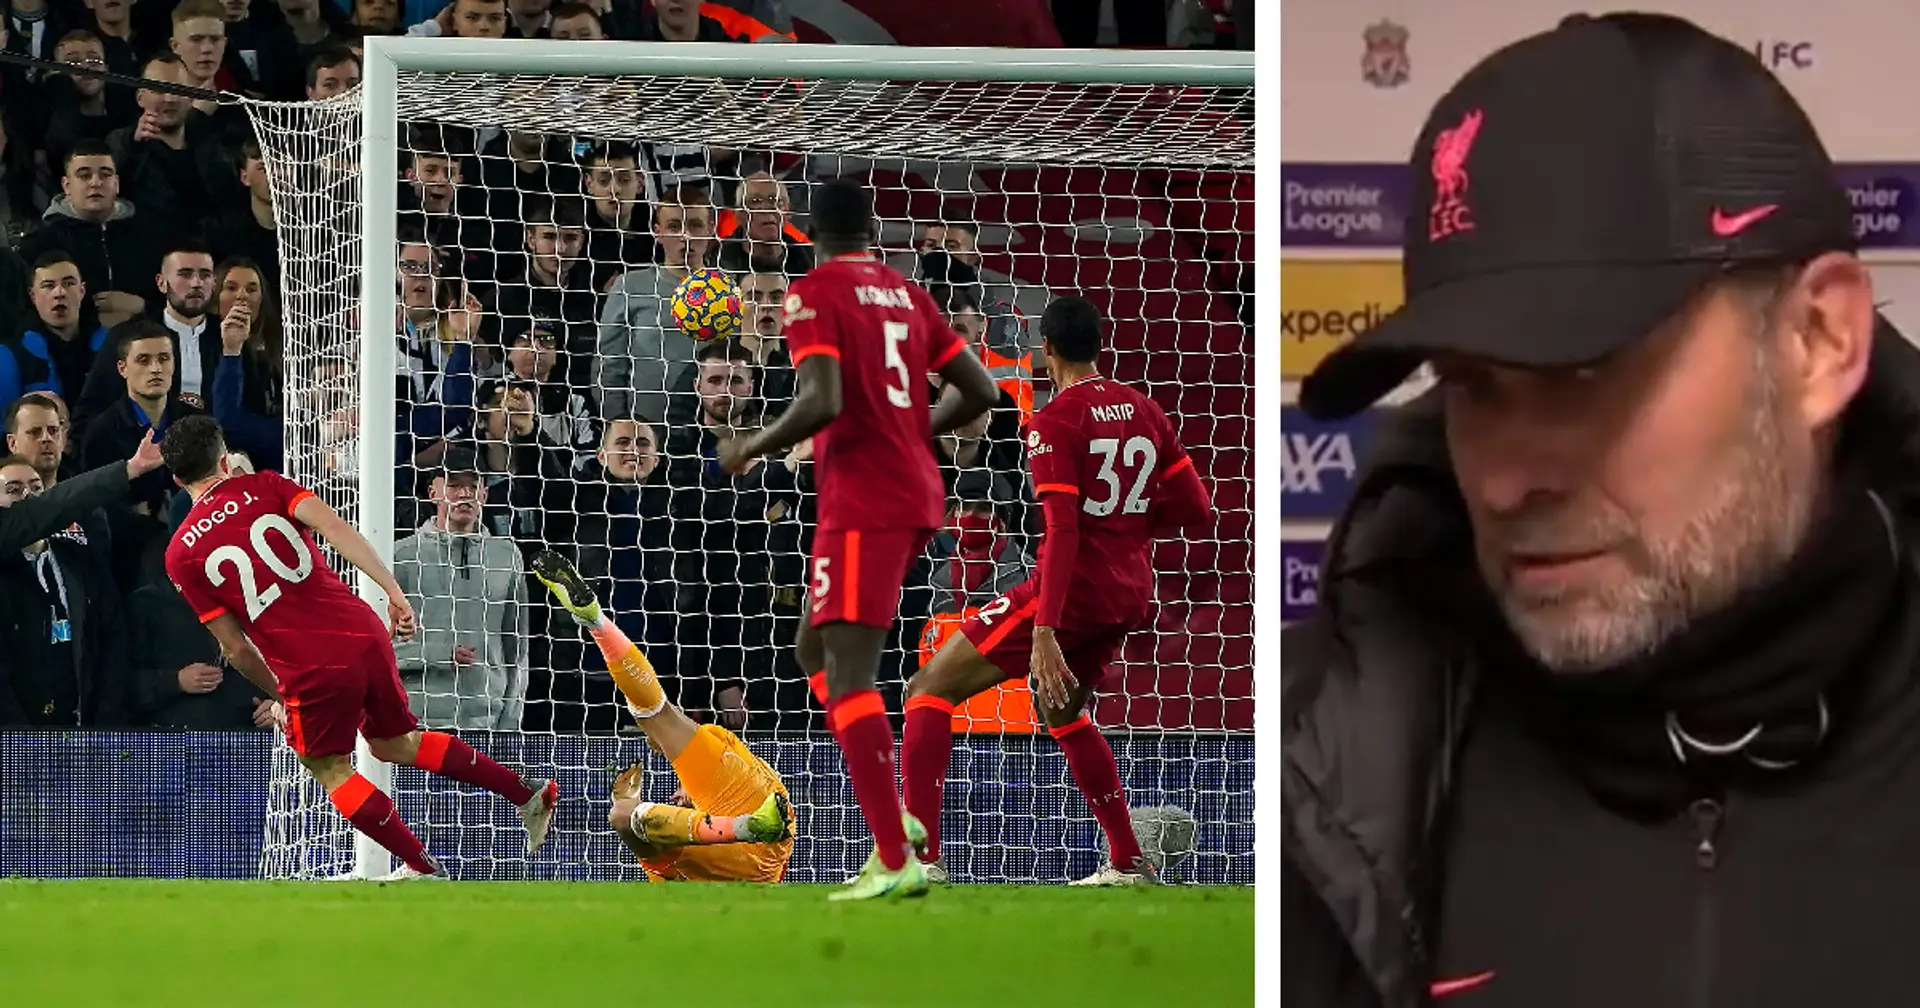 Klopp on Liverpool's equalizer: 'I didn't see it back but the assistant told me it was all good'